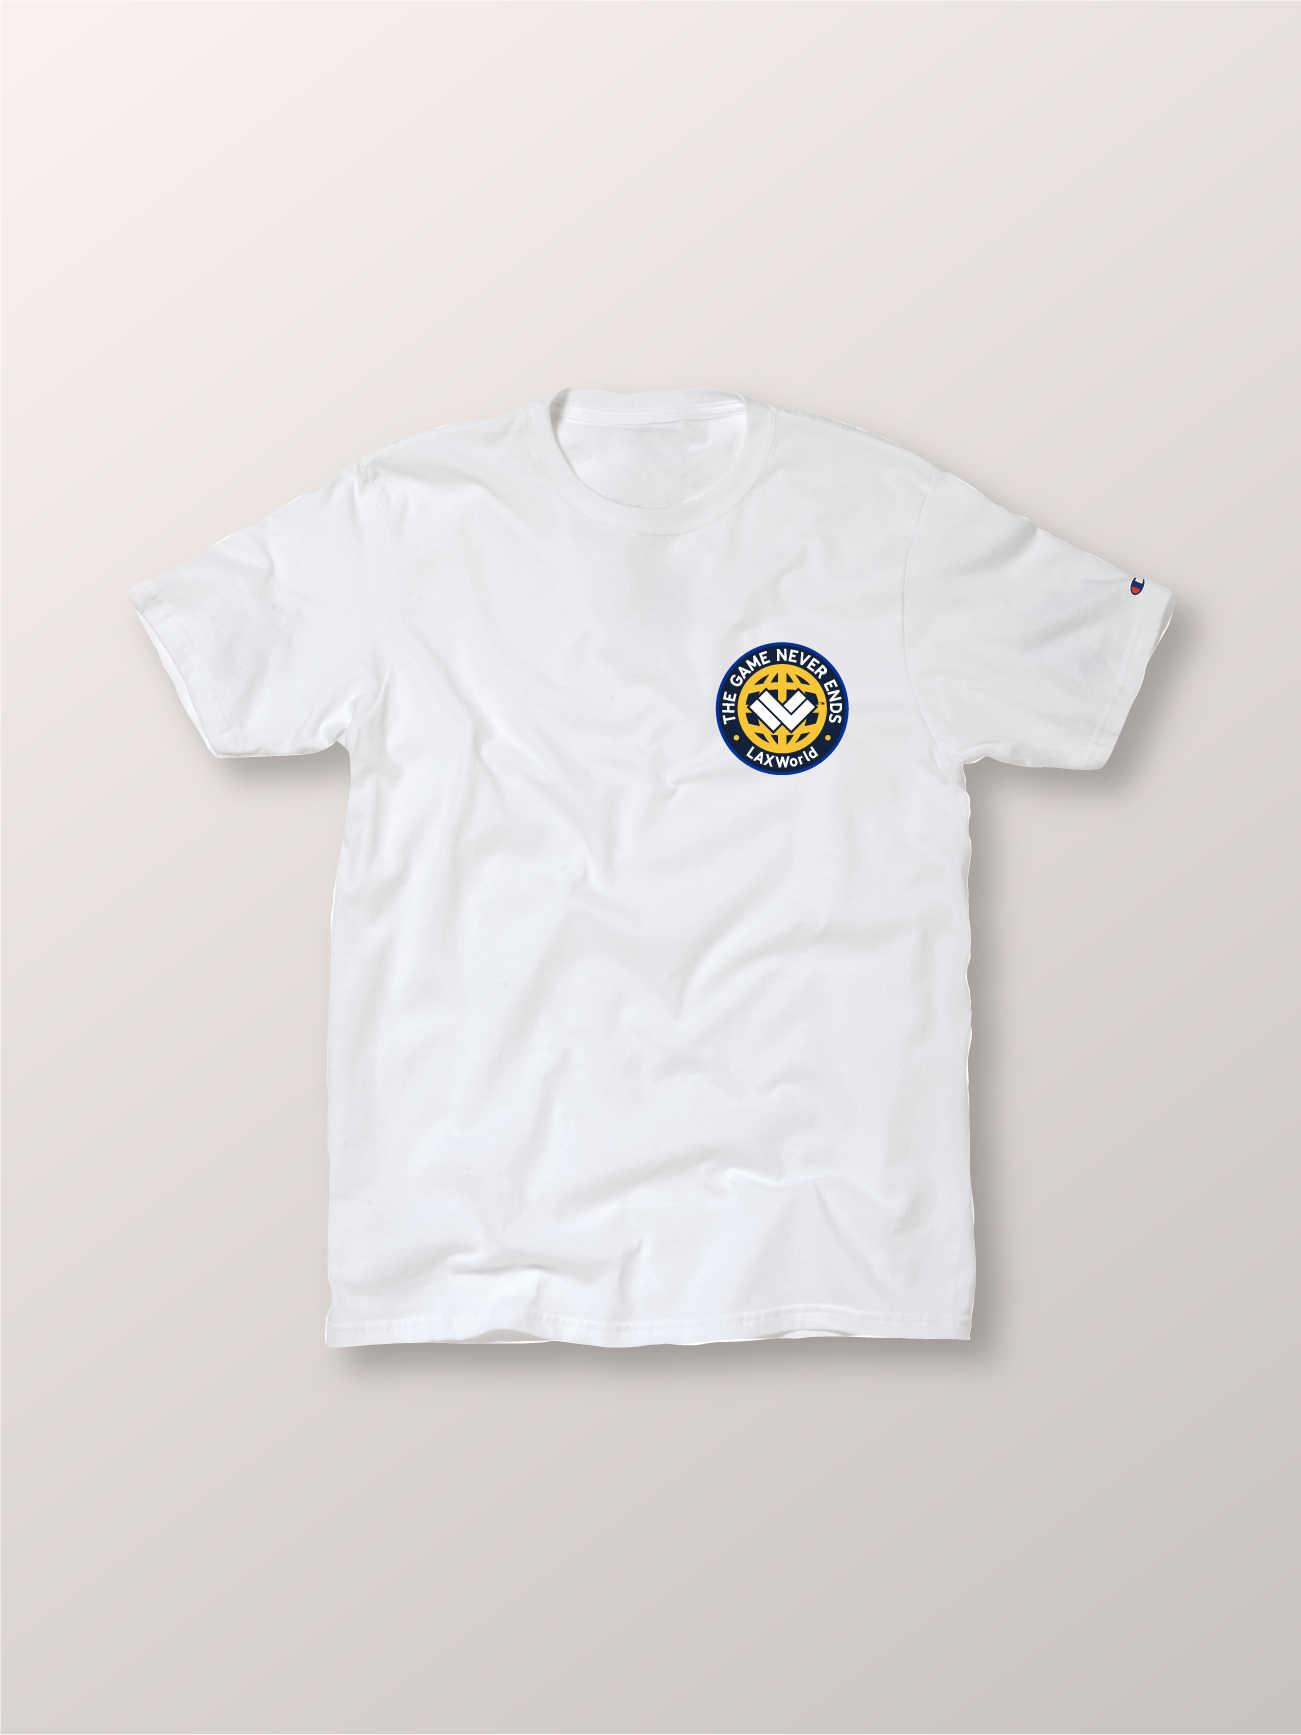 Classic Soul Patch Champion’s White Lacrosse Tee - Front 